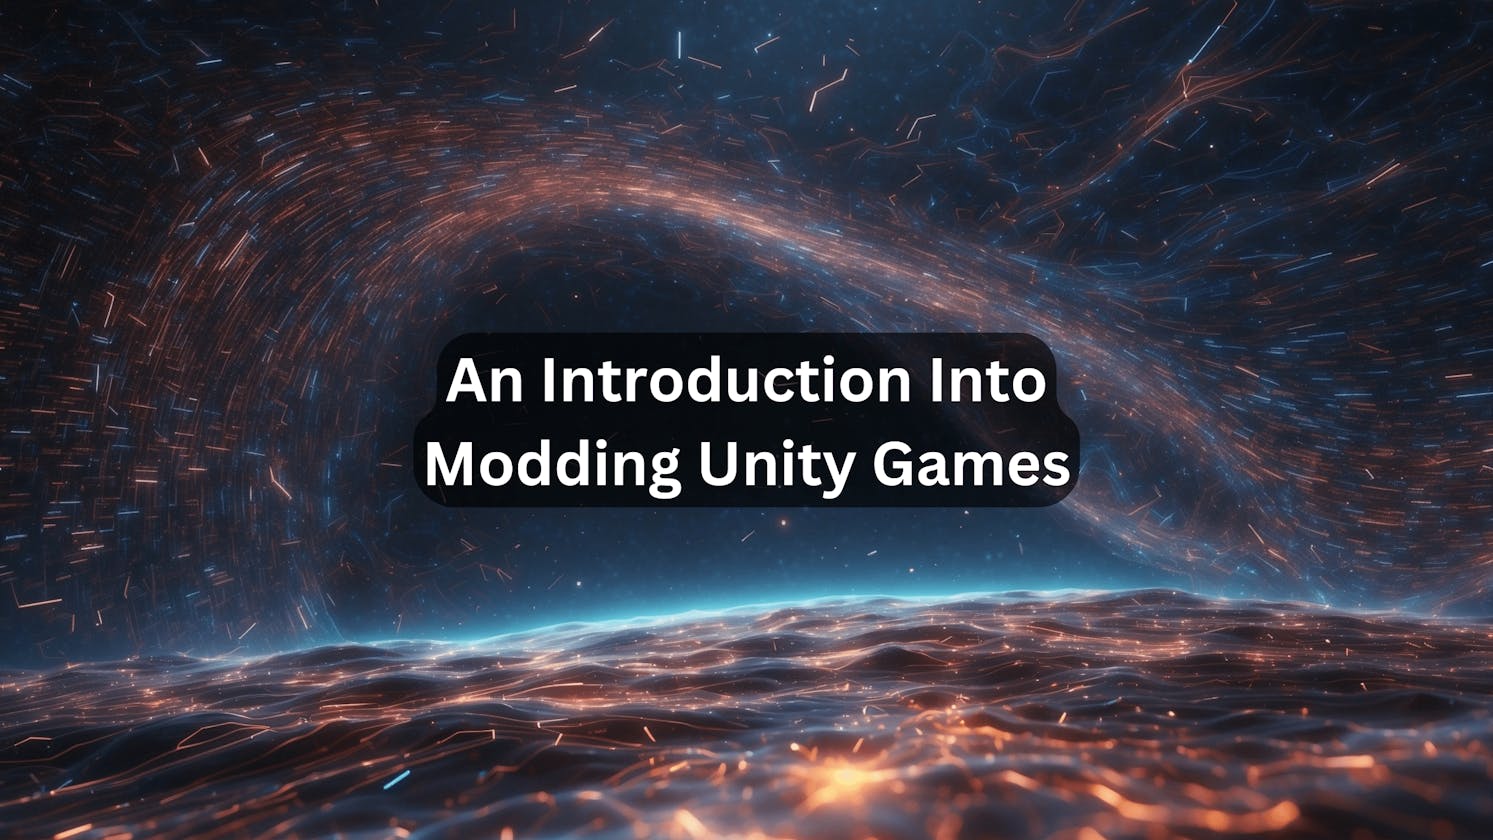 An Introduction Into Modding Unity Games